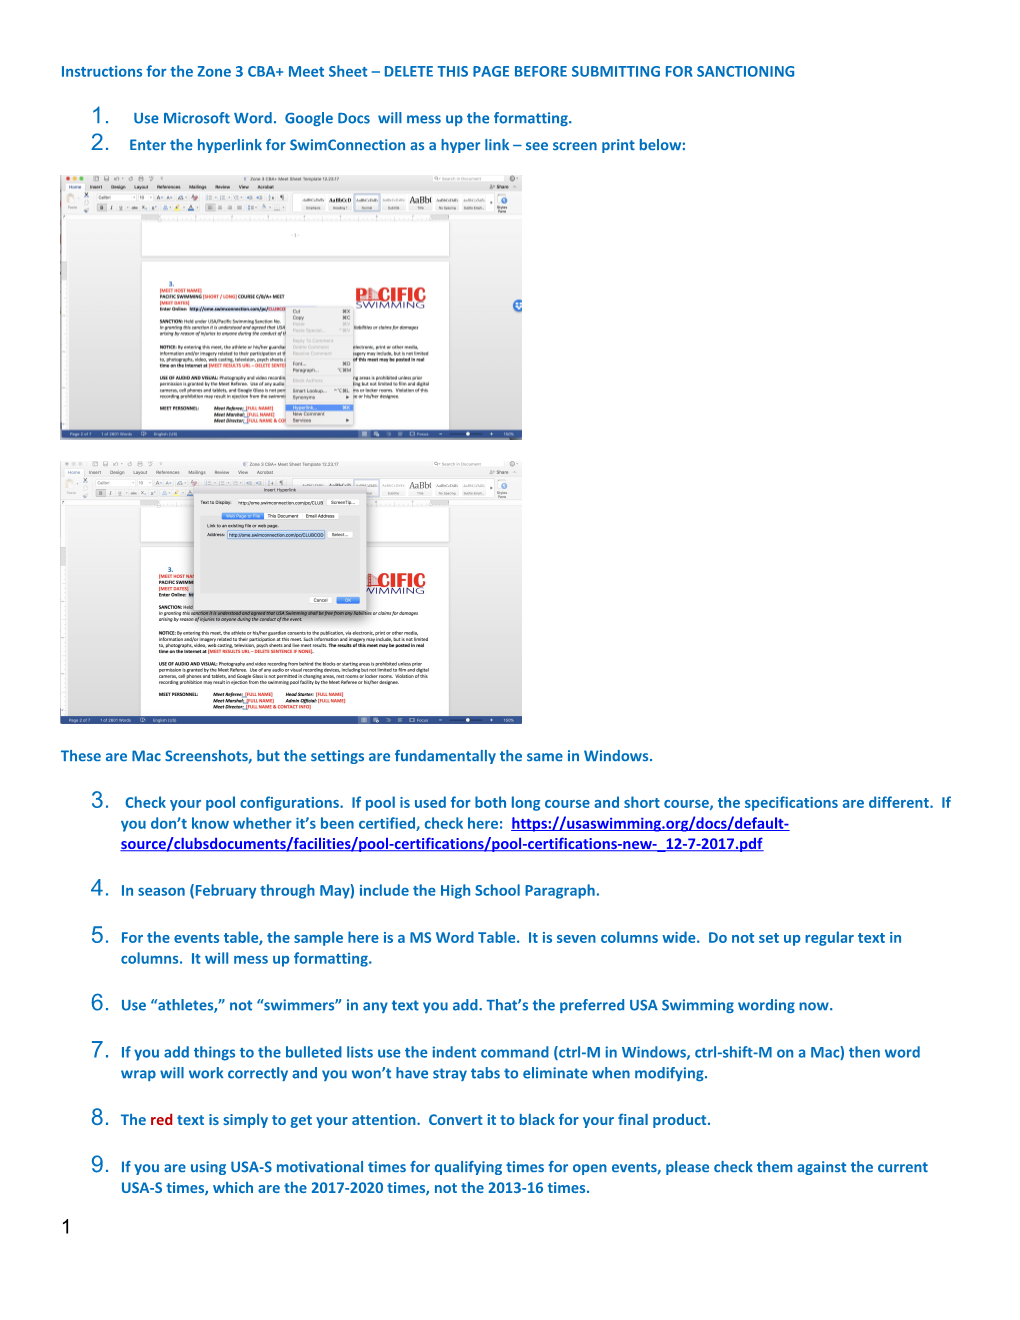 1. Use Microsoft Word. Google Docs Will Mess up the Formatting